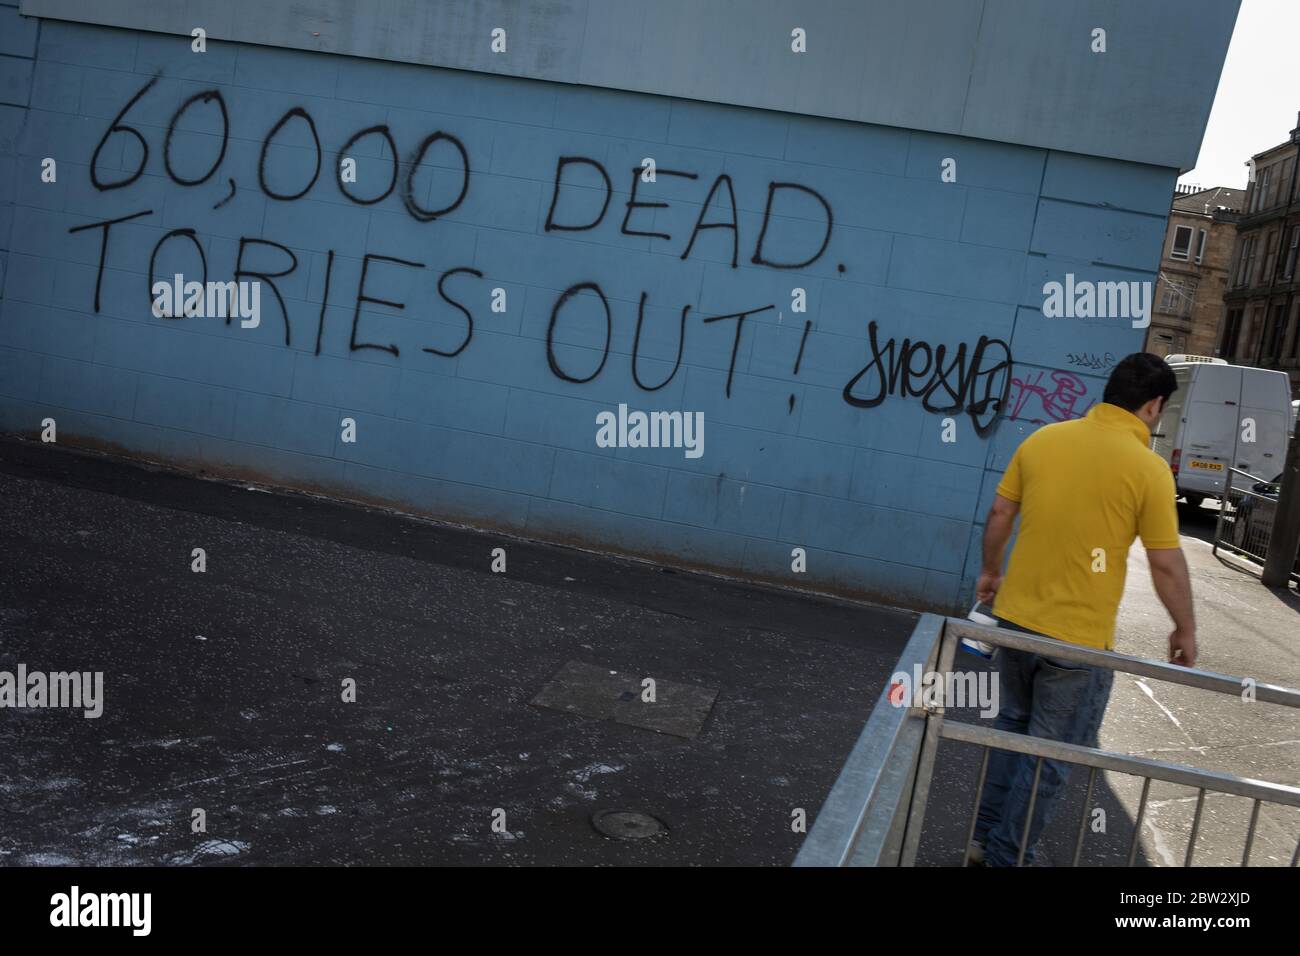 Glasgow, UK, 29th May 2020. Graffiti reading '60,000 Dead, Tories Out!'  has appeared on a wall in the Govanhill district of the city, displaying local anger at the policies and handling of the CoronaVirus Covid-19 health pandemic by the UK's Conservative government led by Prime Minister Boris Johnson. In Glasgow, Scotland, on 29 May 2020. Photo credit: Jeremy Sutton-Hibbert/Alamy Live News. Stock Photo